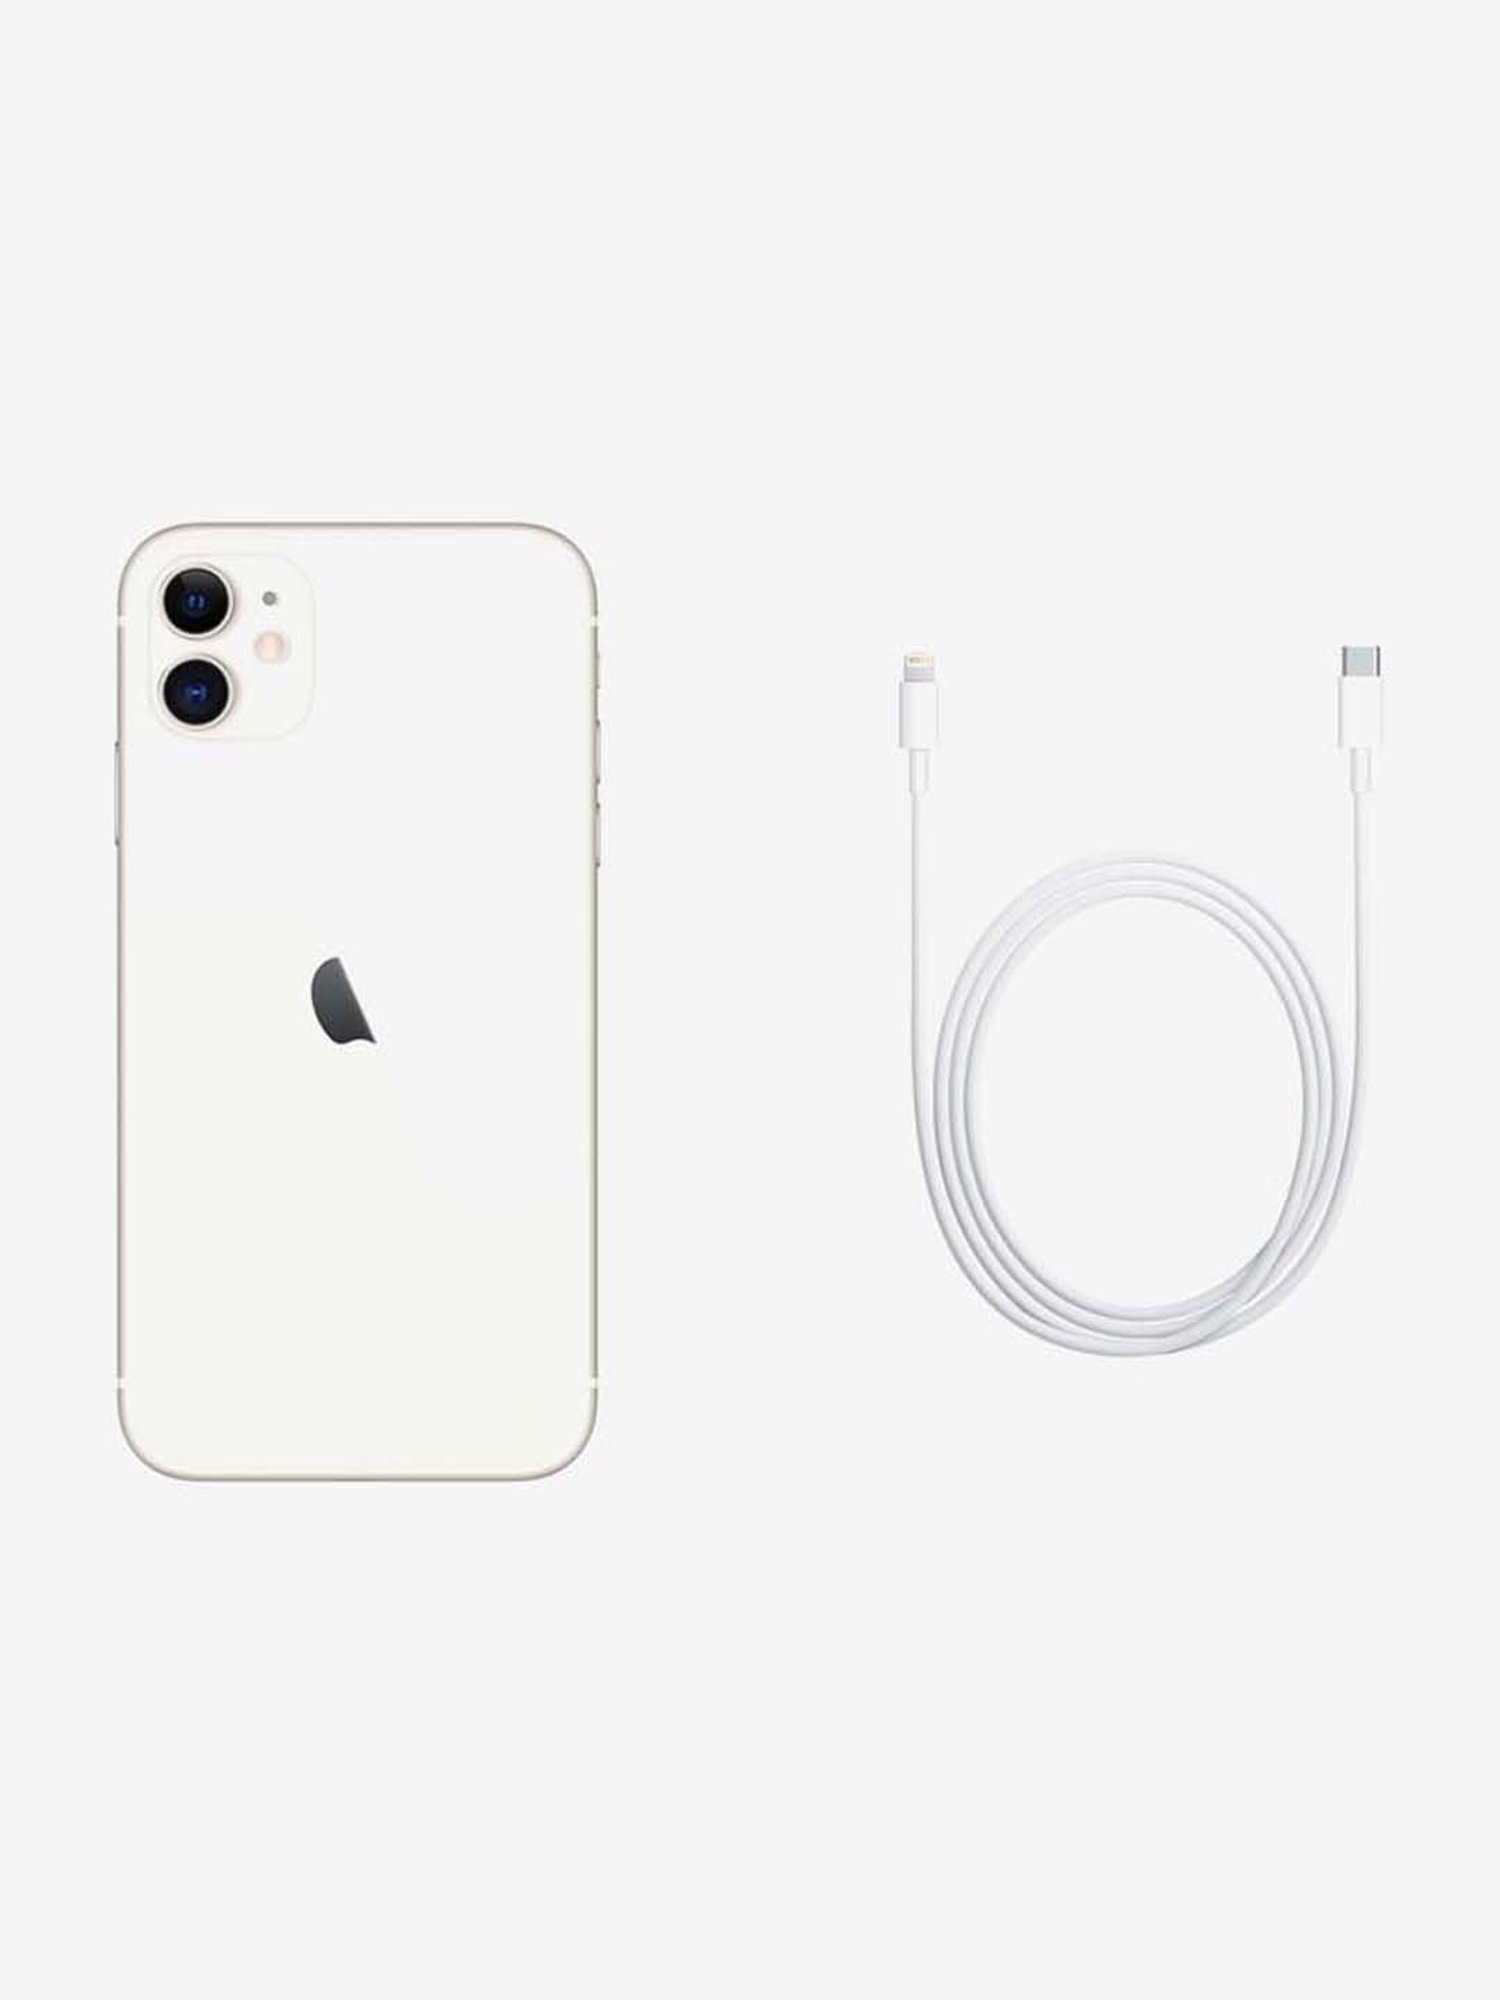 Buy Apple Iphone 11 128gb White Includes Earpods Power Adapter Online At Best Prices Tata Cliq